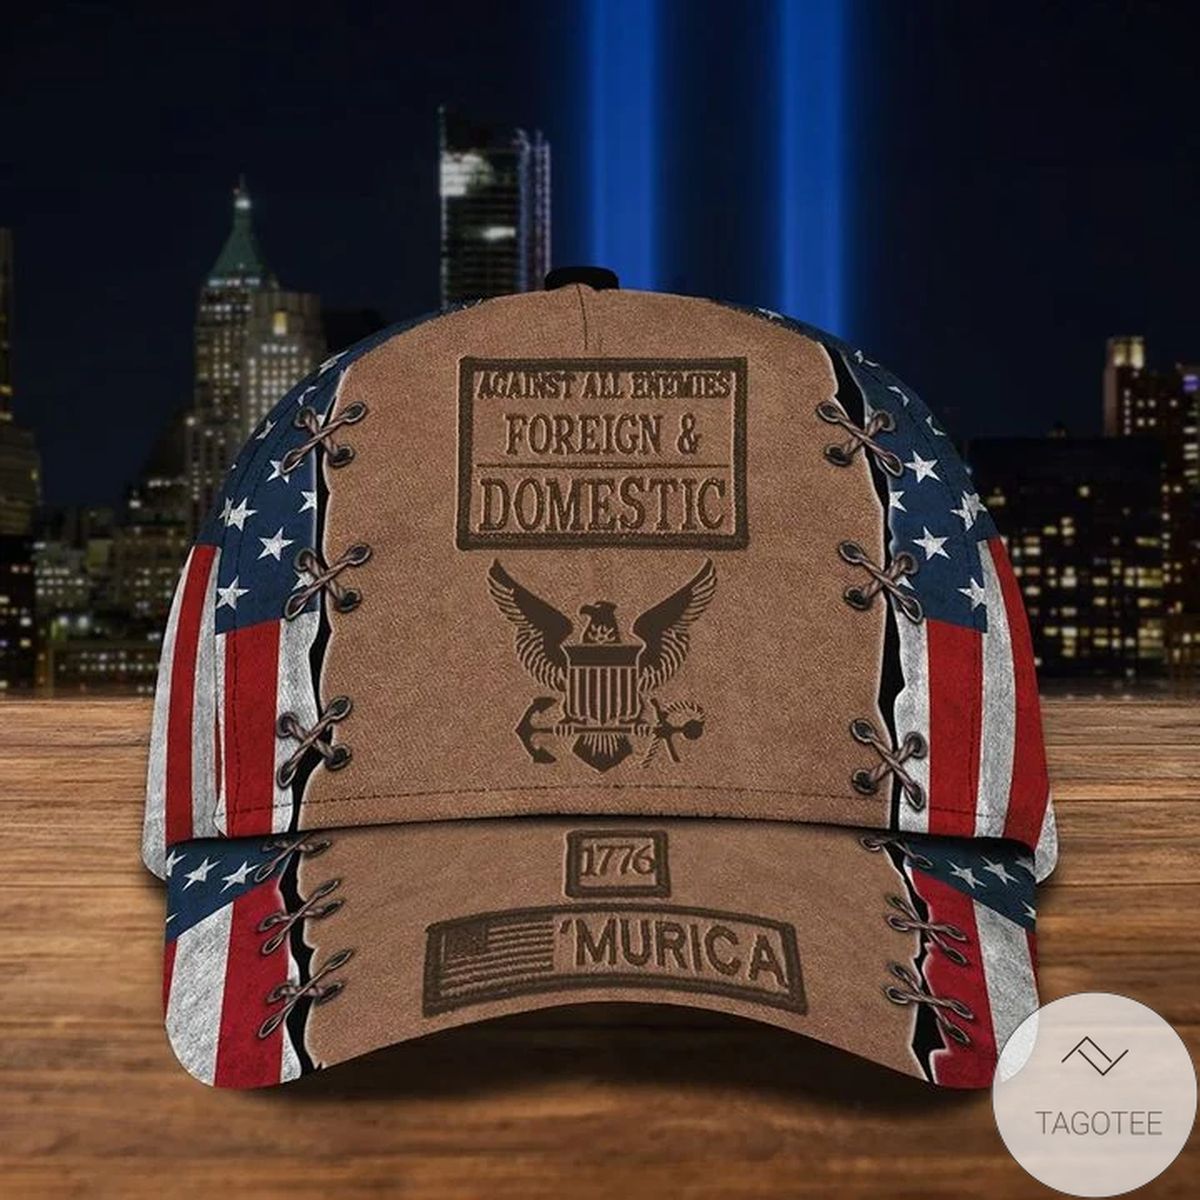 US Navy 1776 'Murica Hat Unique American Flag Cap Against All Enemies Foreign And Domestic